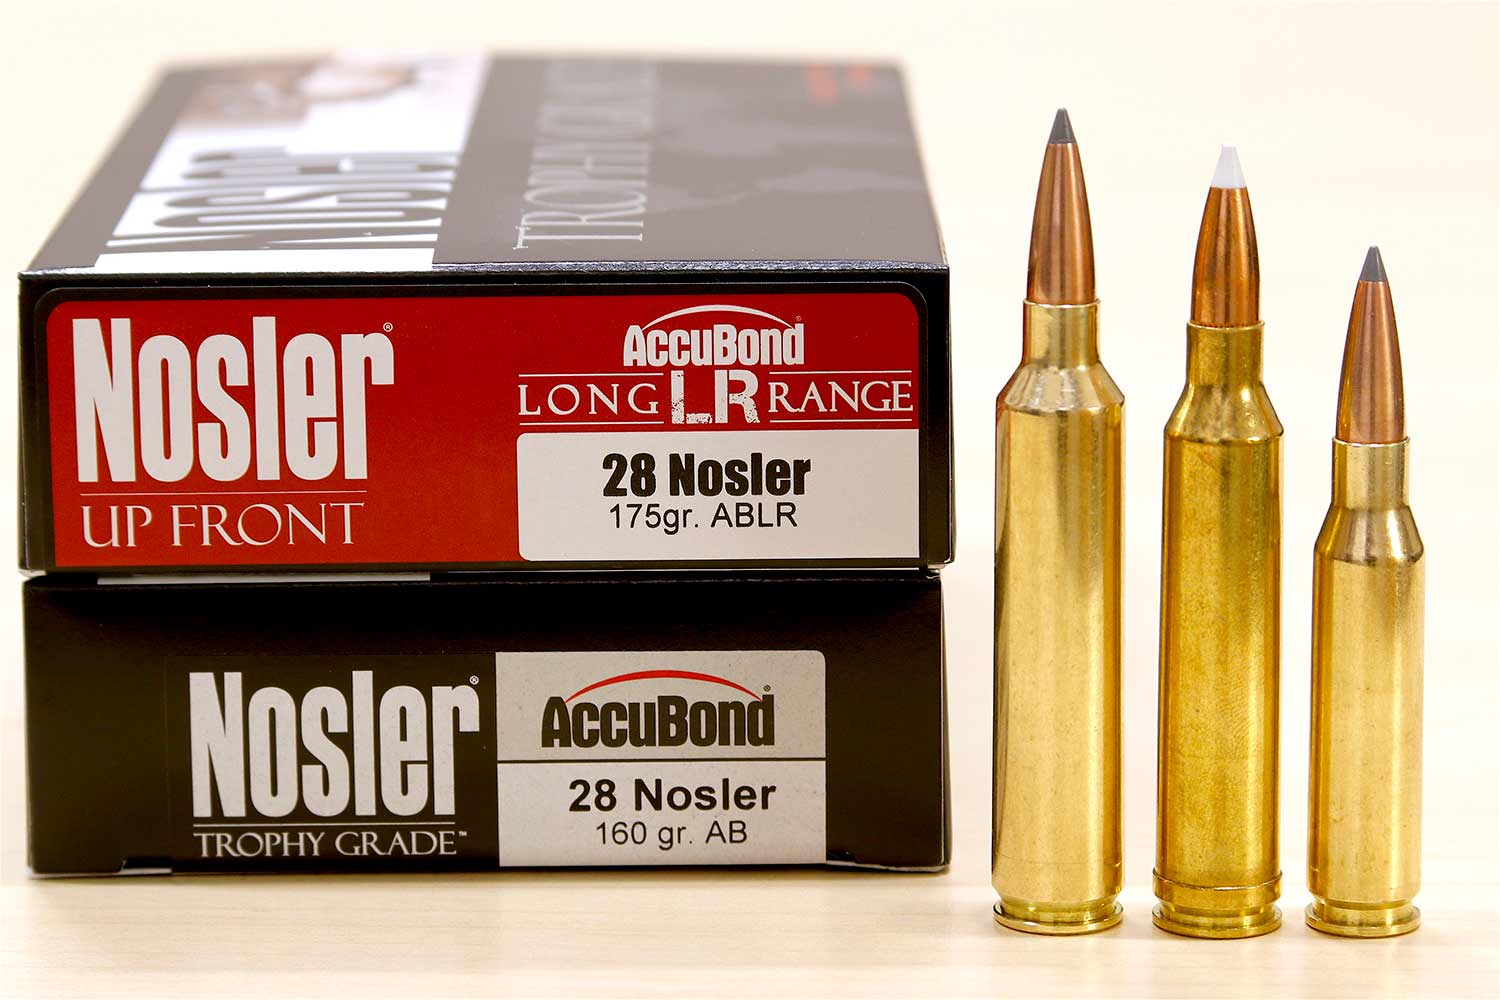 boxes of nosler ammo